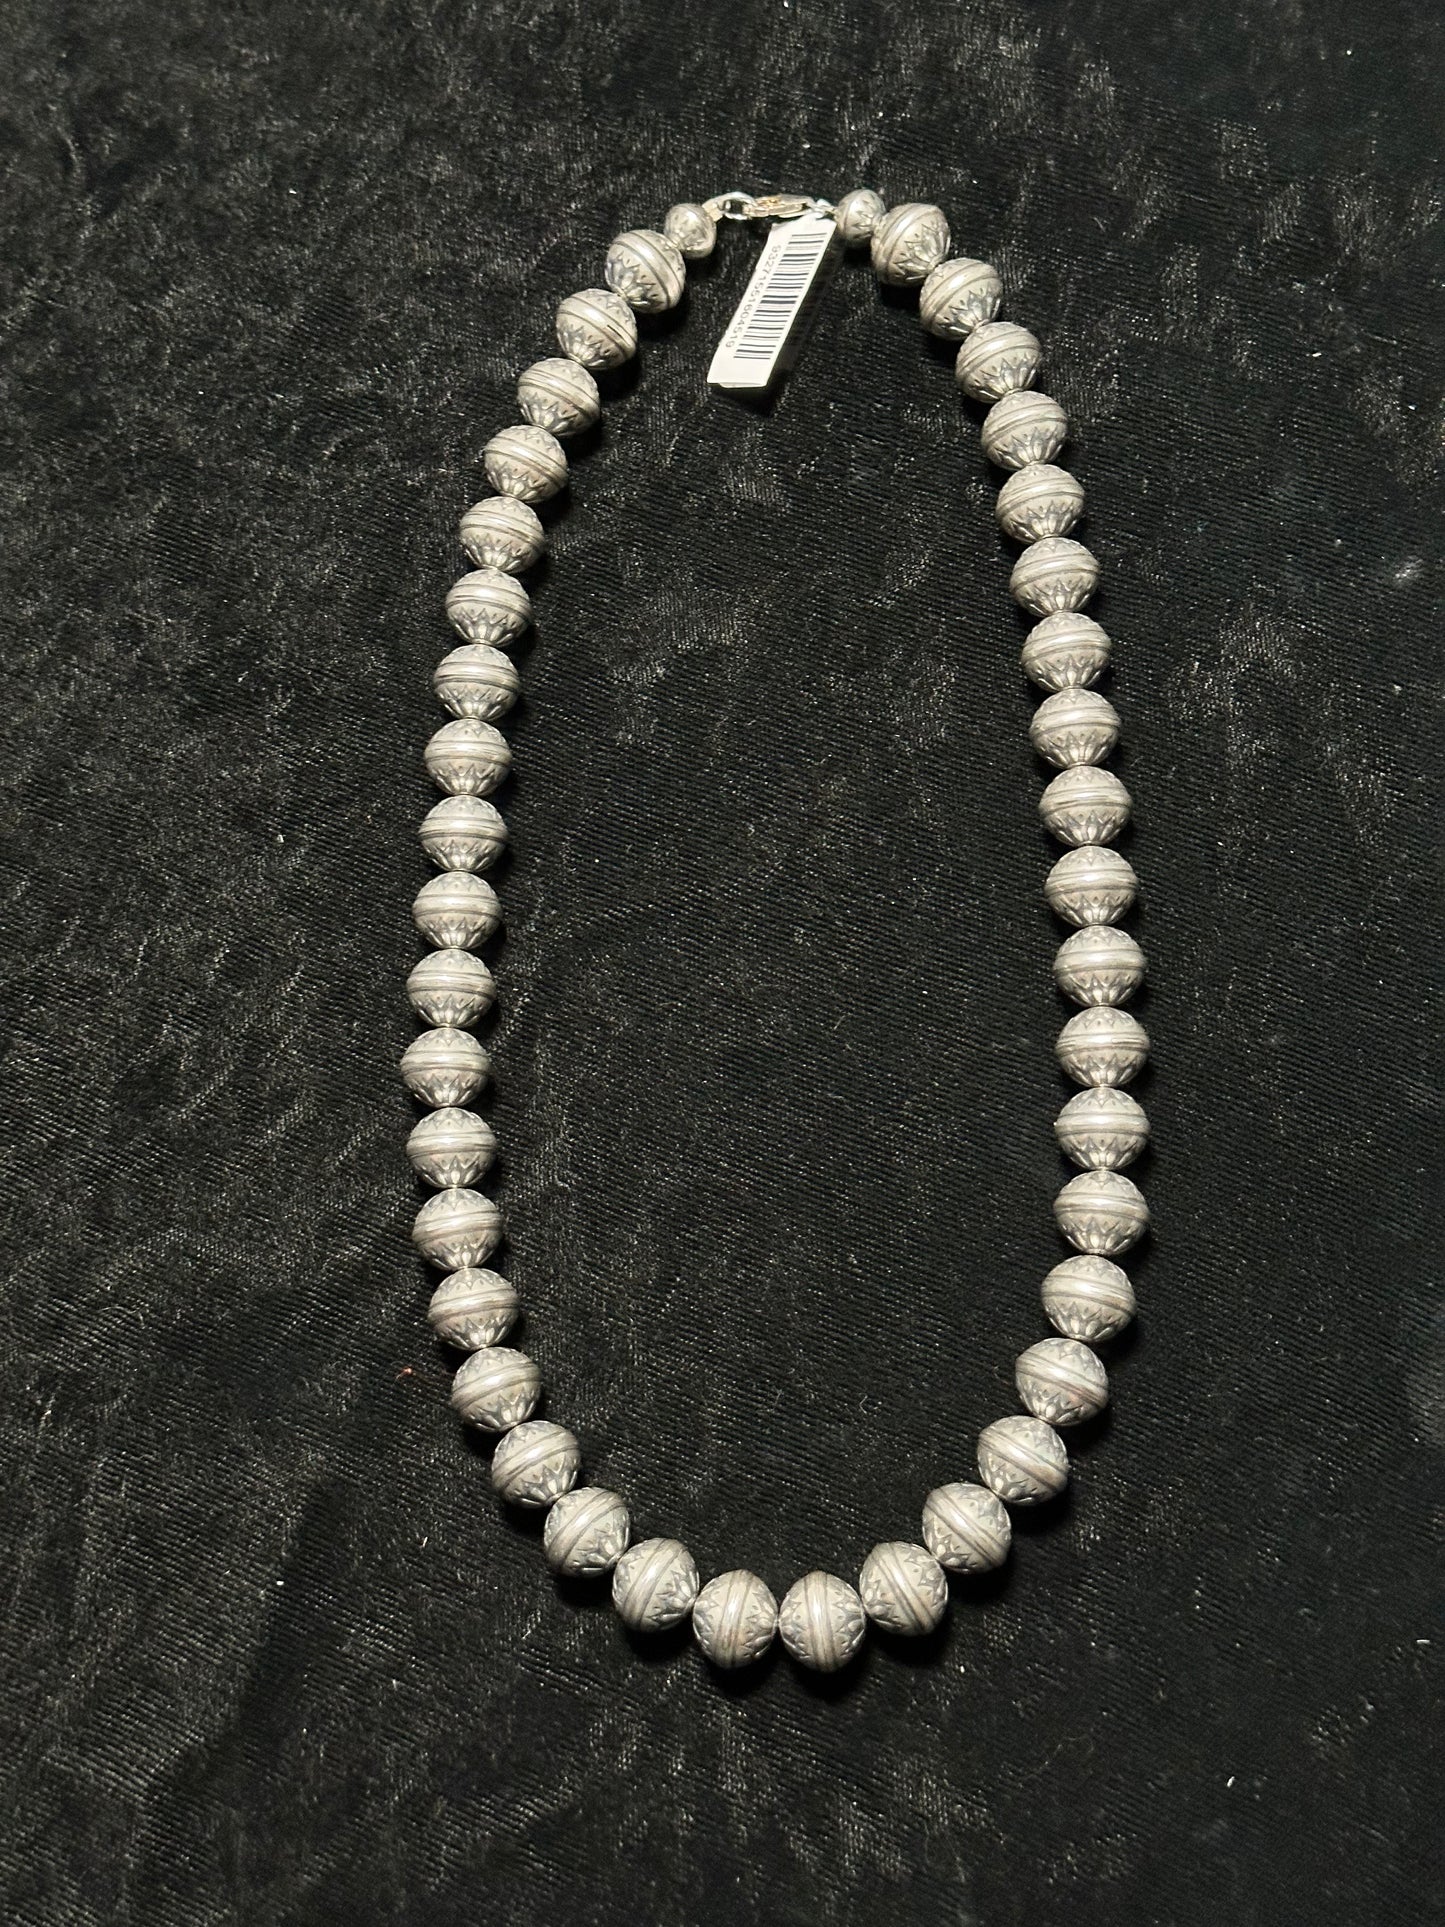 LOT 71 12/17 Hand Soldered & Stamped Navajo Pearls 18" Necklace